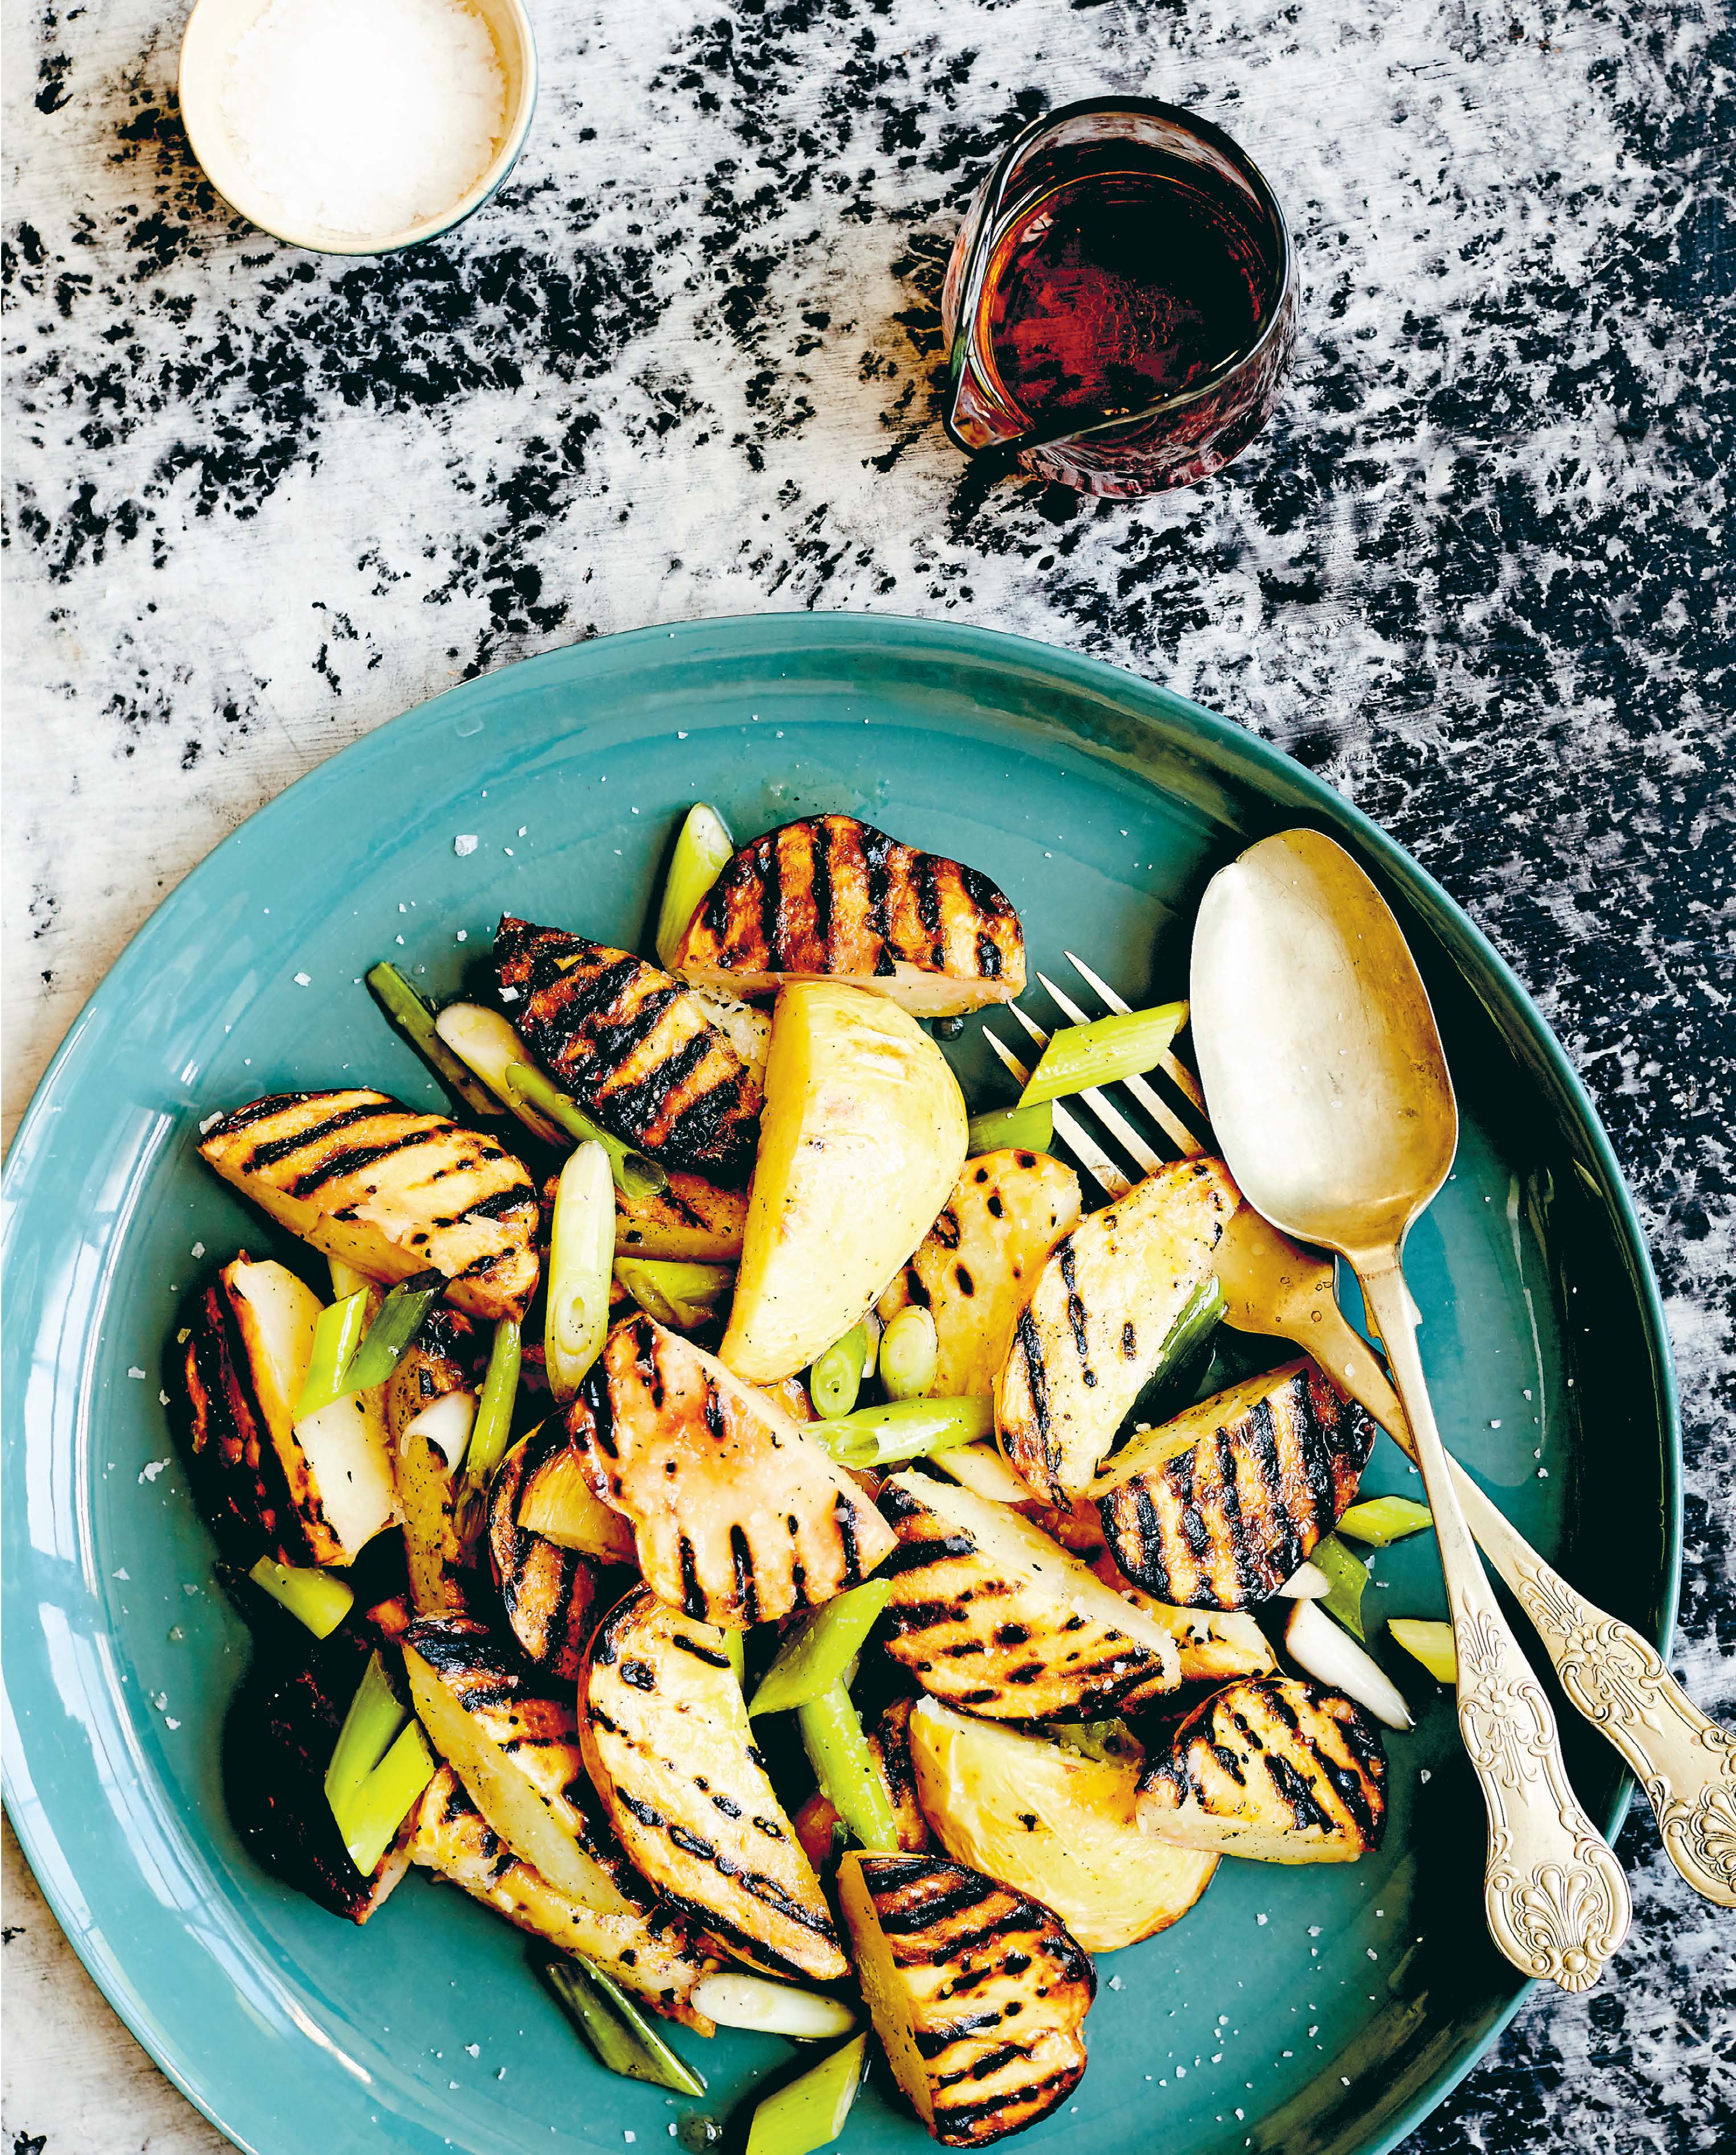 Grilled potato and spring onion salad